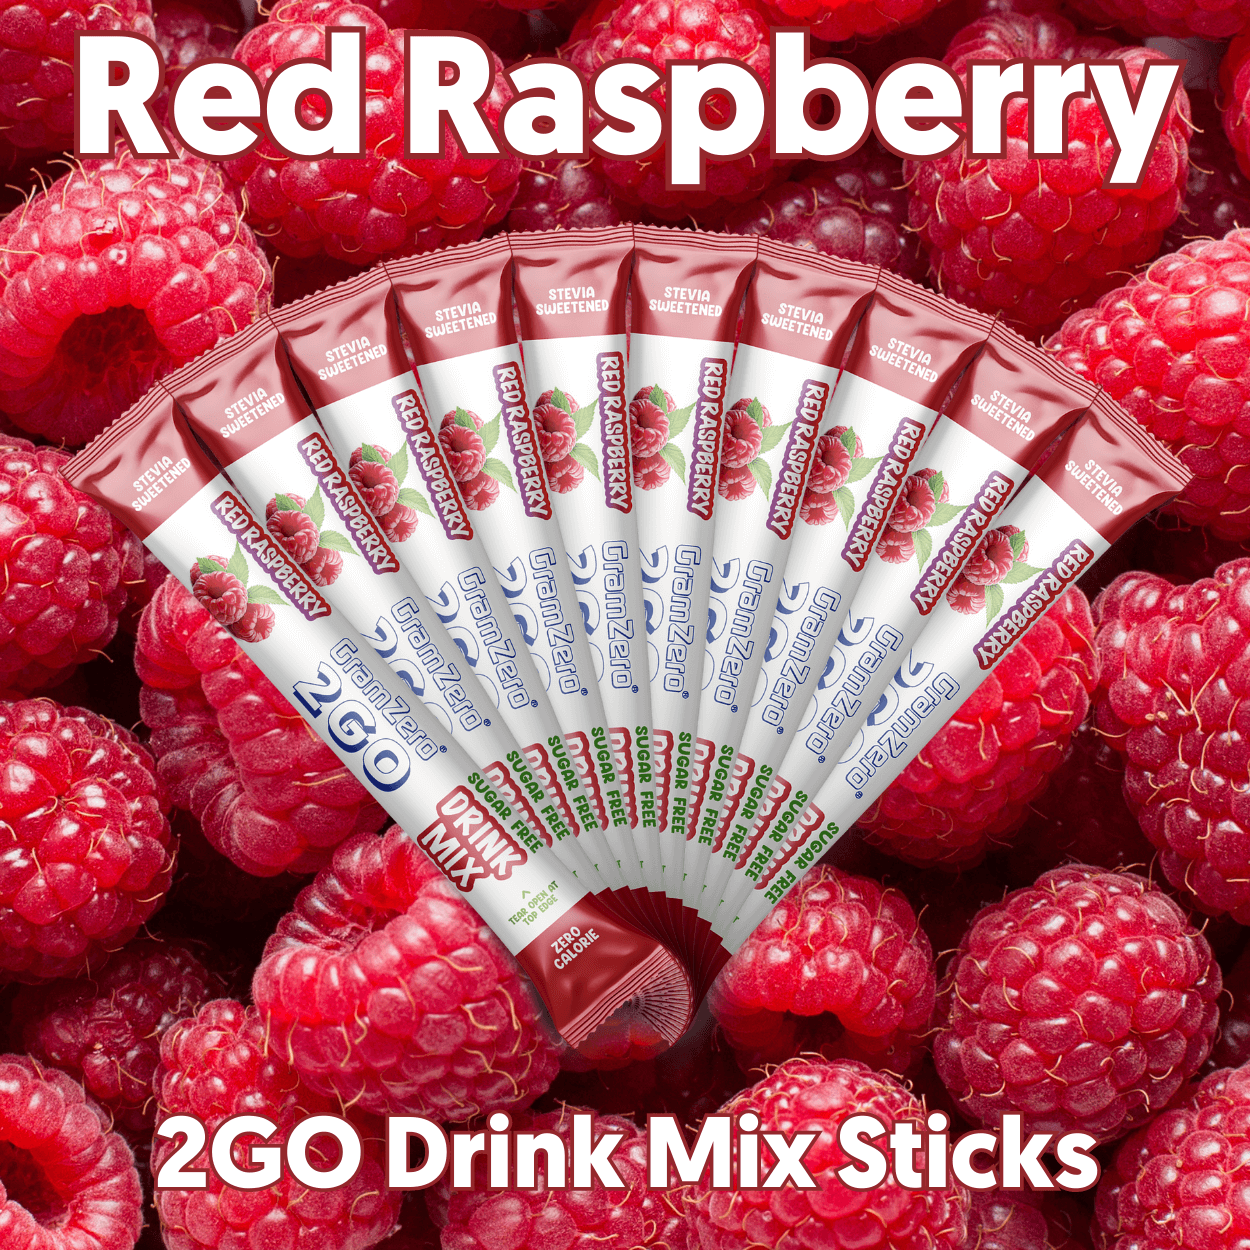 RED RASPBERRY 2GO Sugar Free Drink Mix Sticks: 10 Pack ~ Great for Loaded Tea Kits